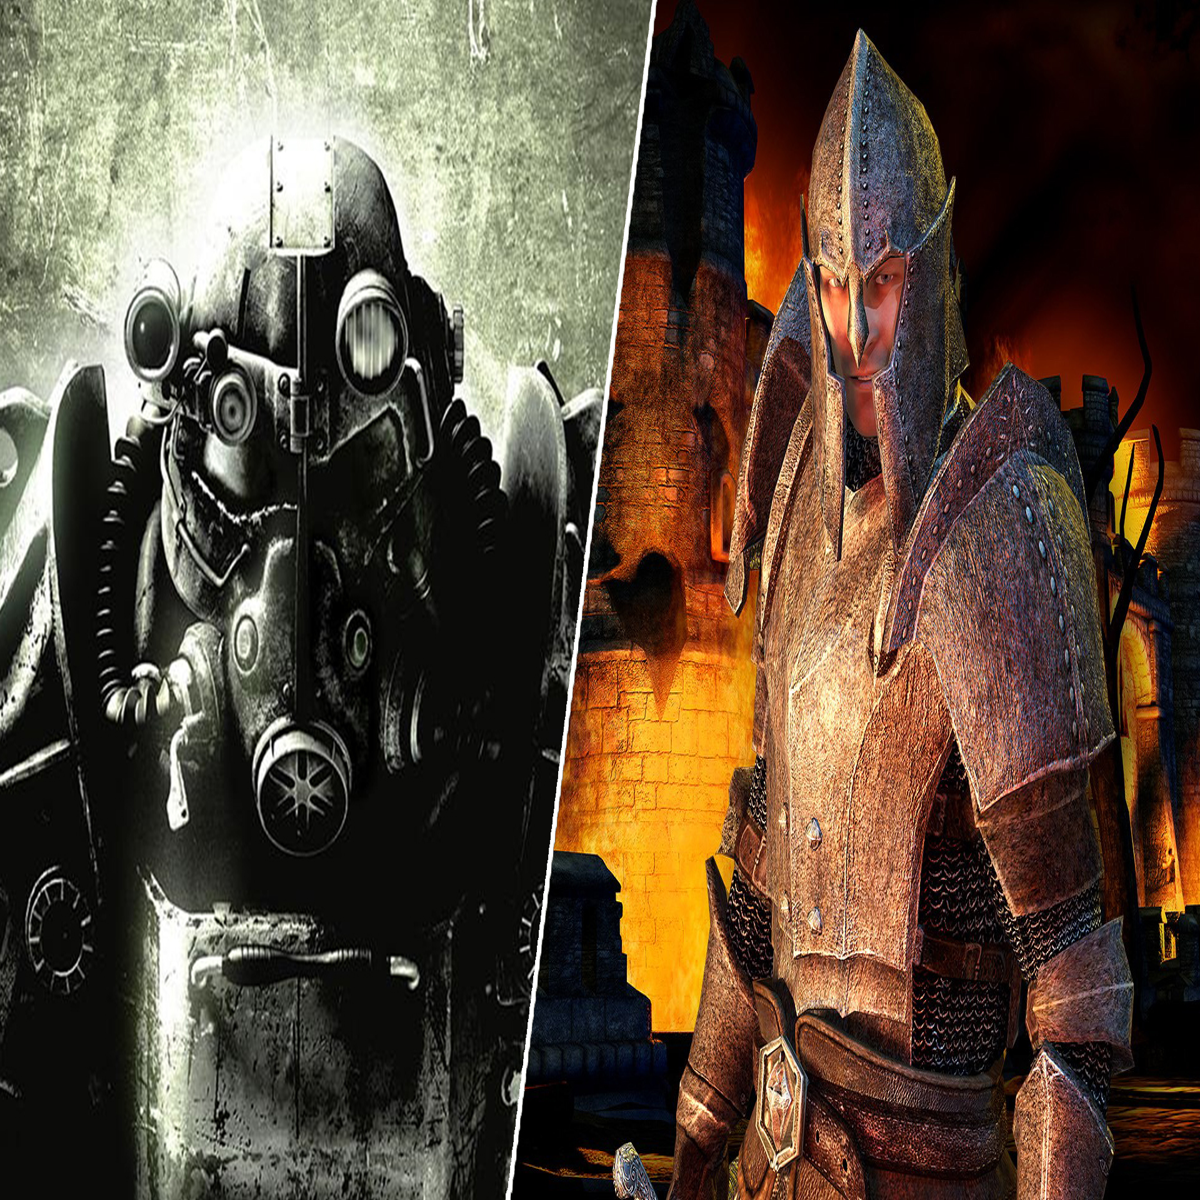 Oblivion, Fallout 3 Remasters Leaked Alongside Dishonored 3, Ghostwire:  Tokyo Sequel, and More